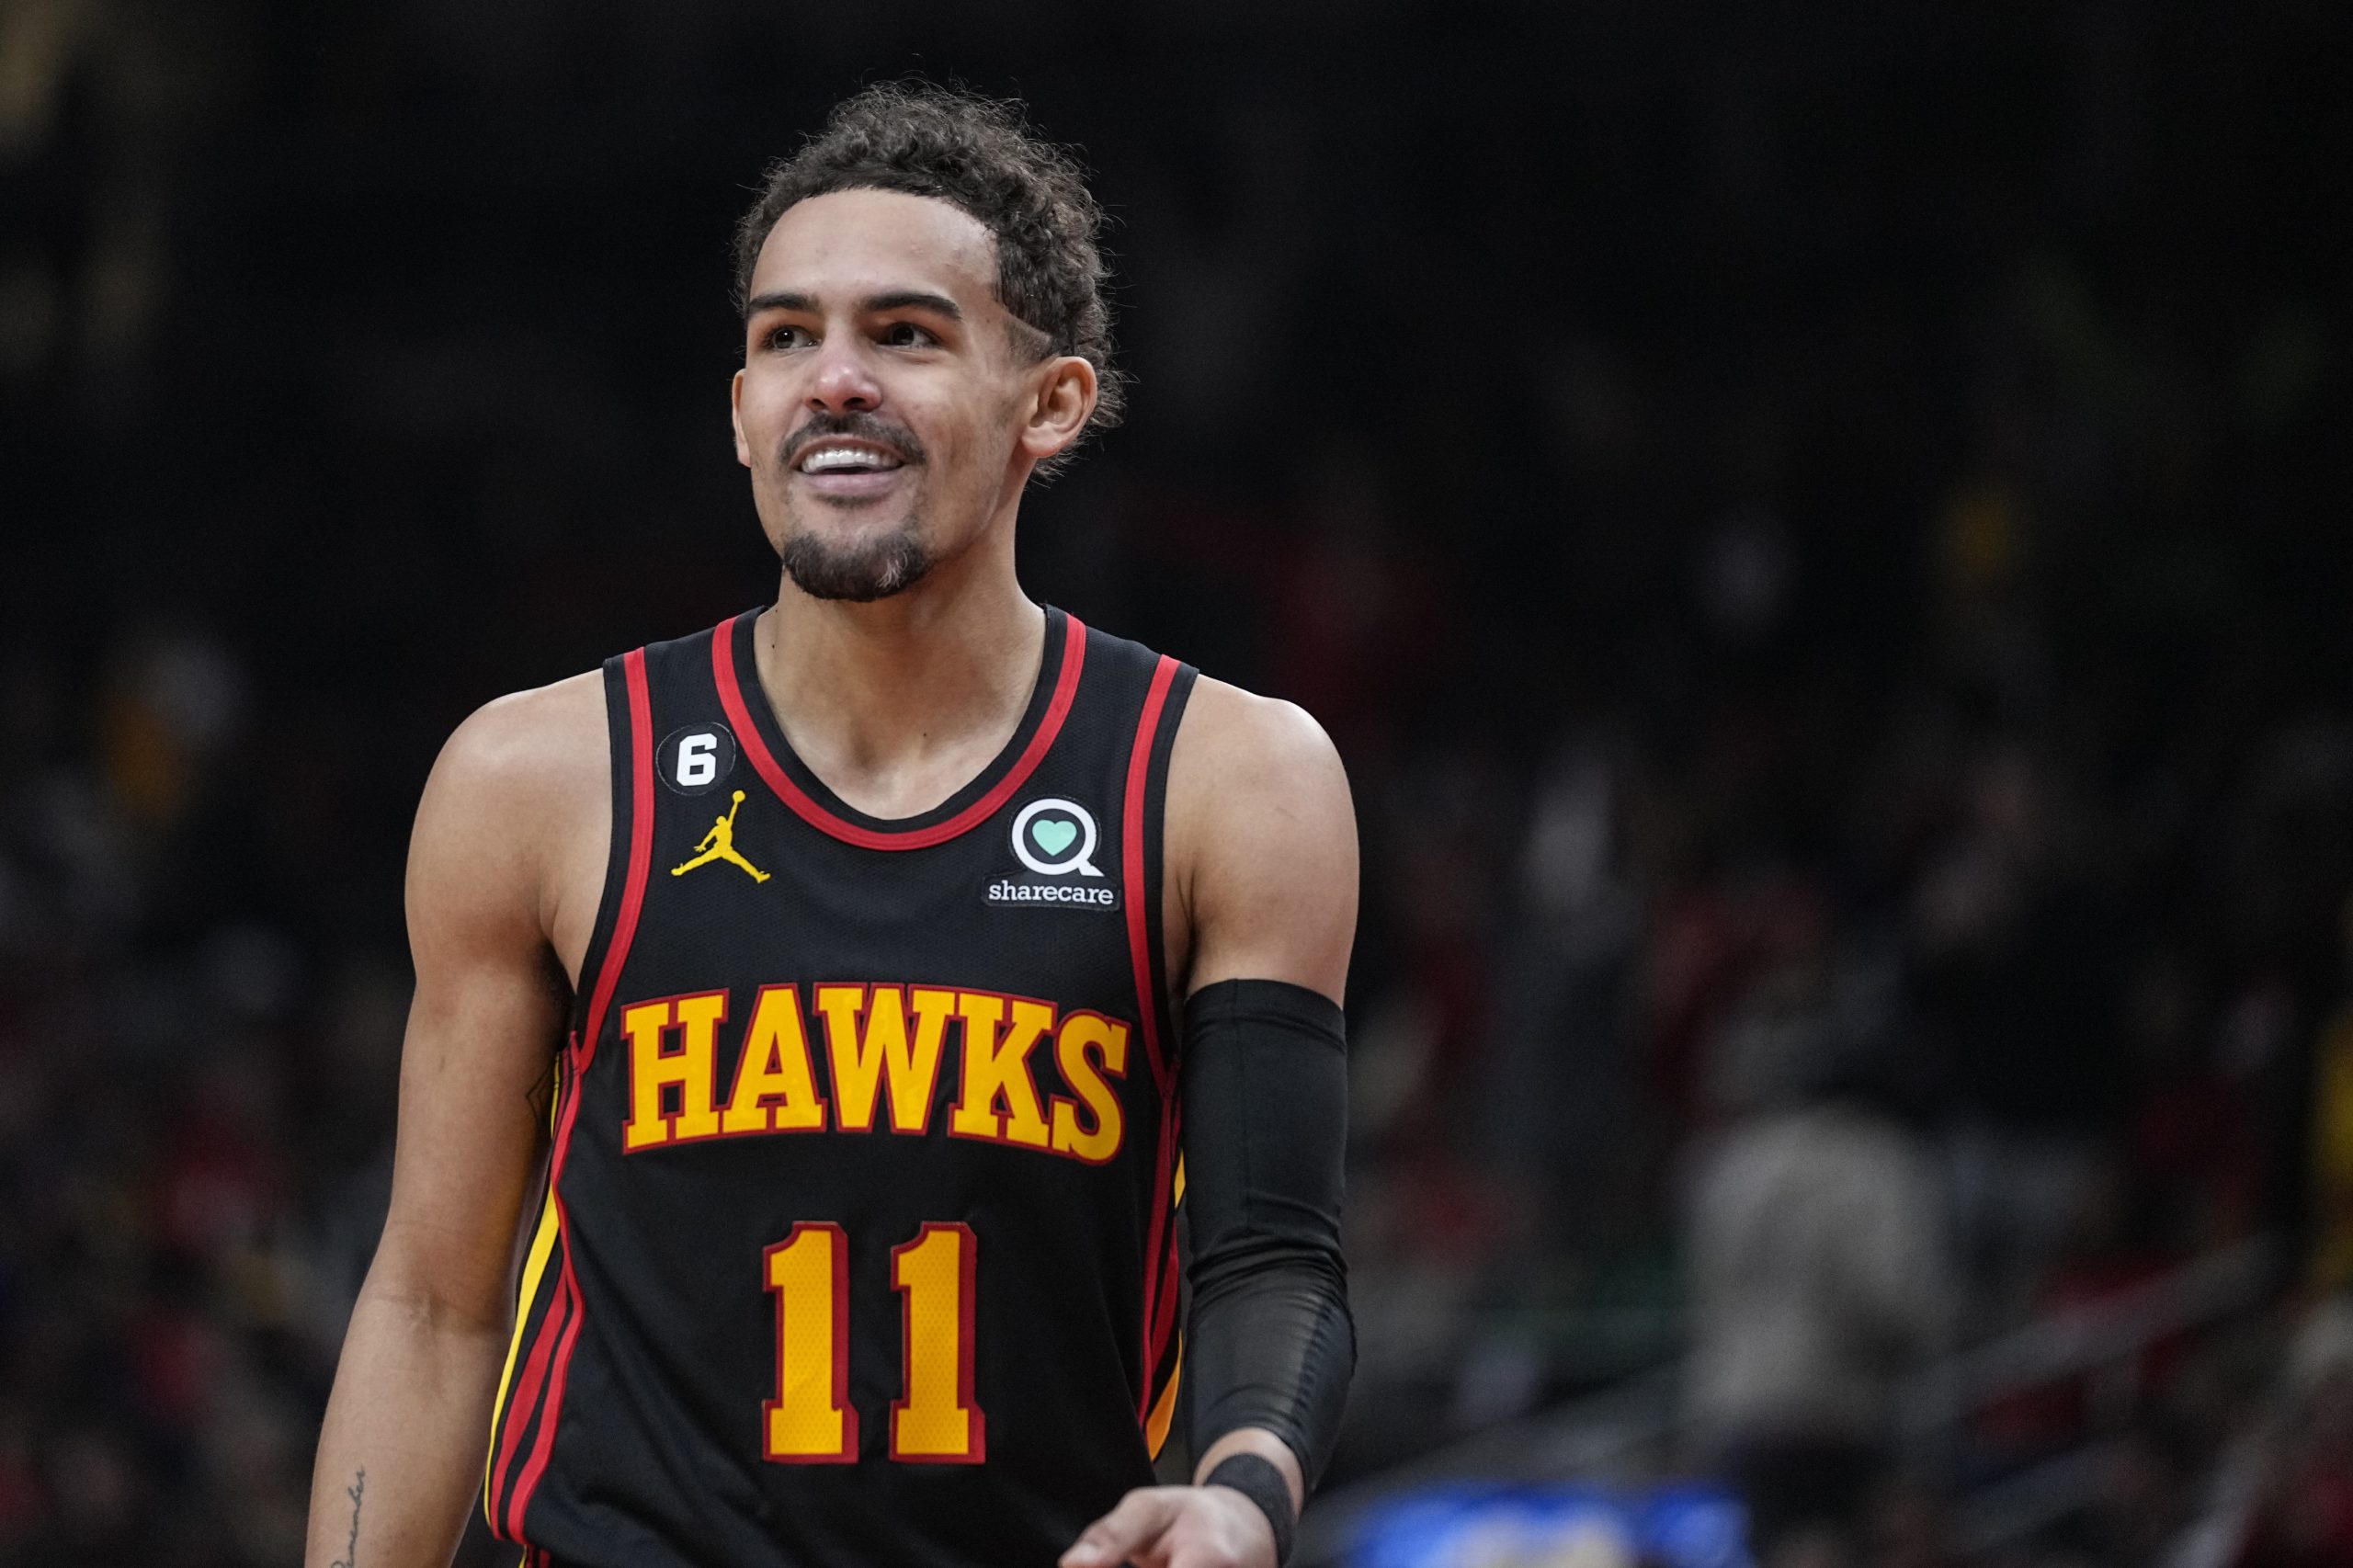 NBA Insider: Pistons Wild Card Team To Land Trae Young